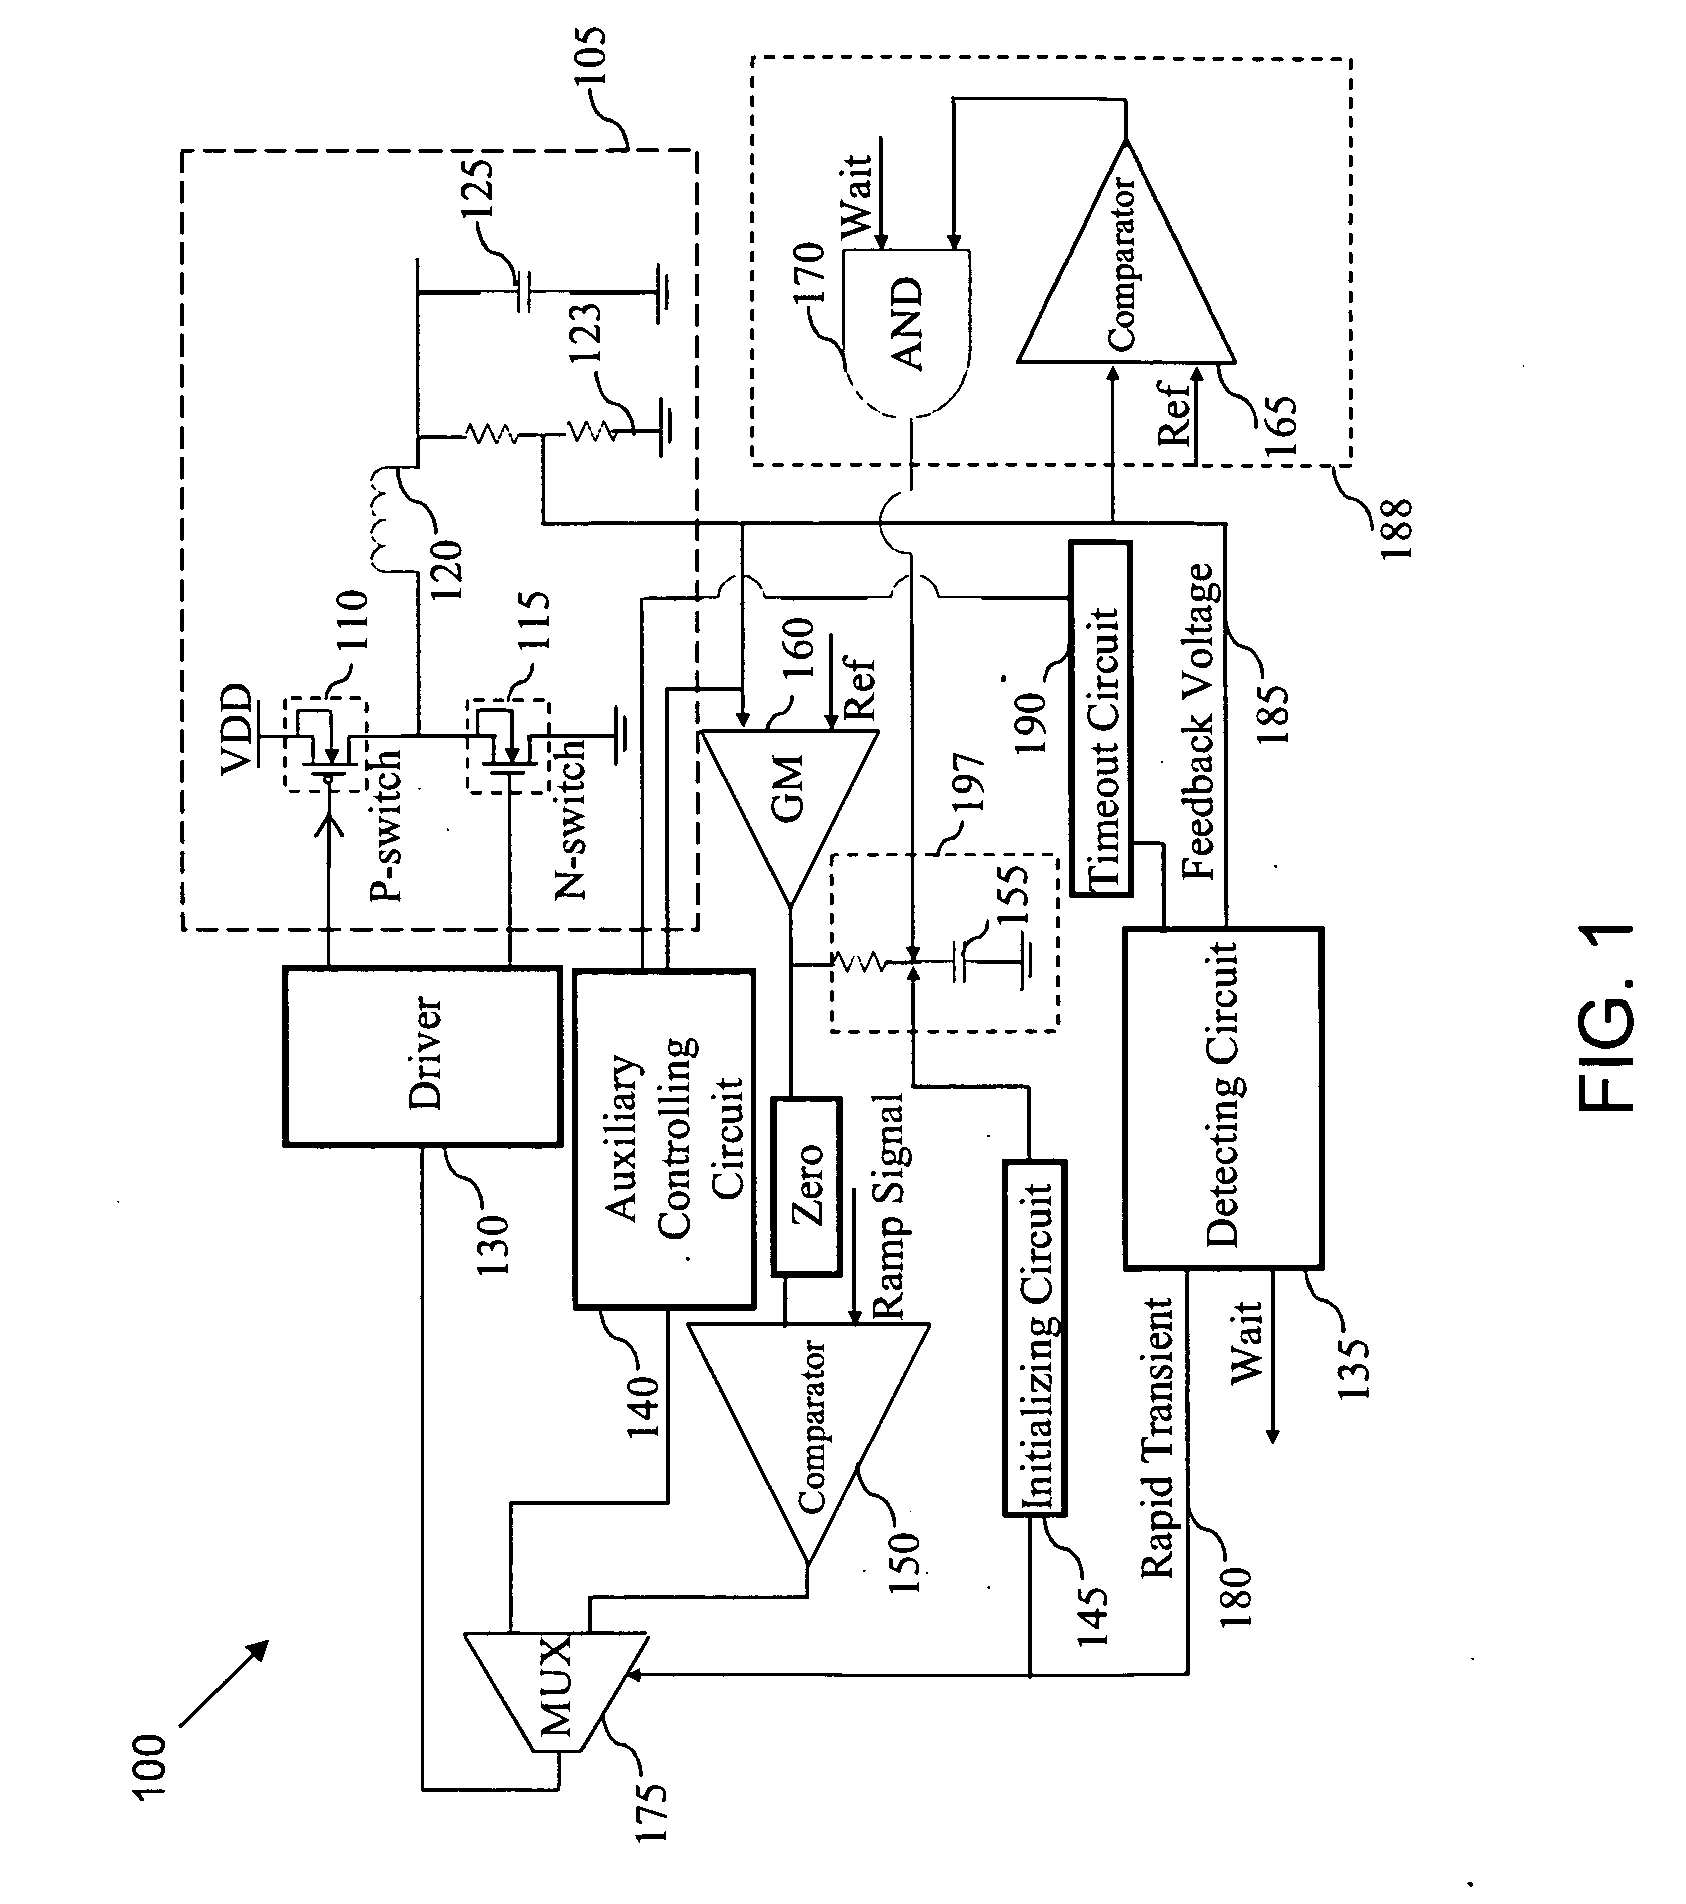 Transient recovery circuit for switching devices